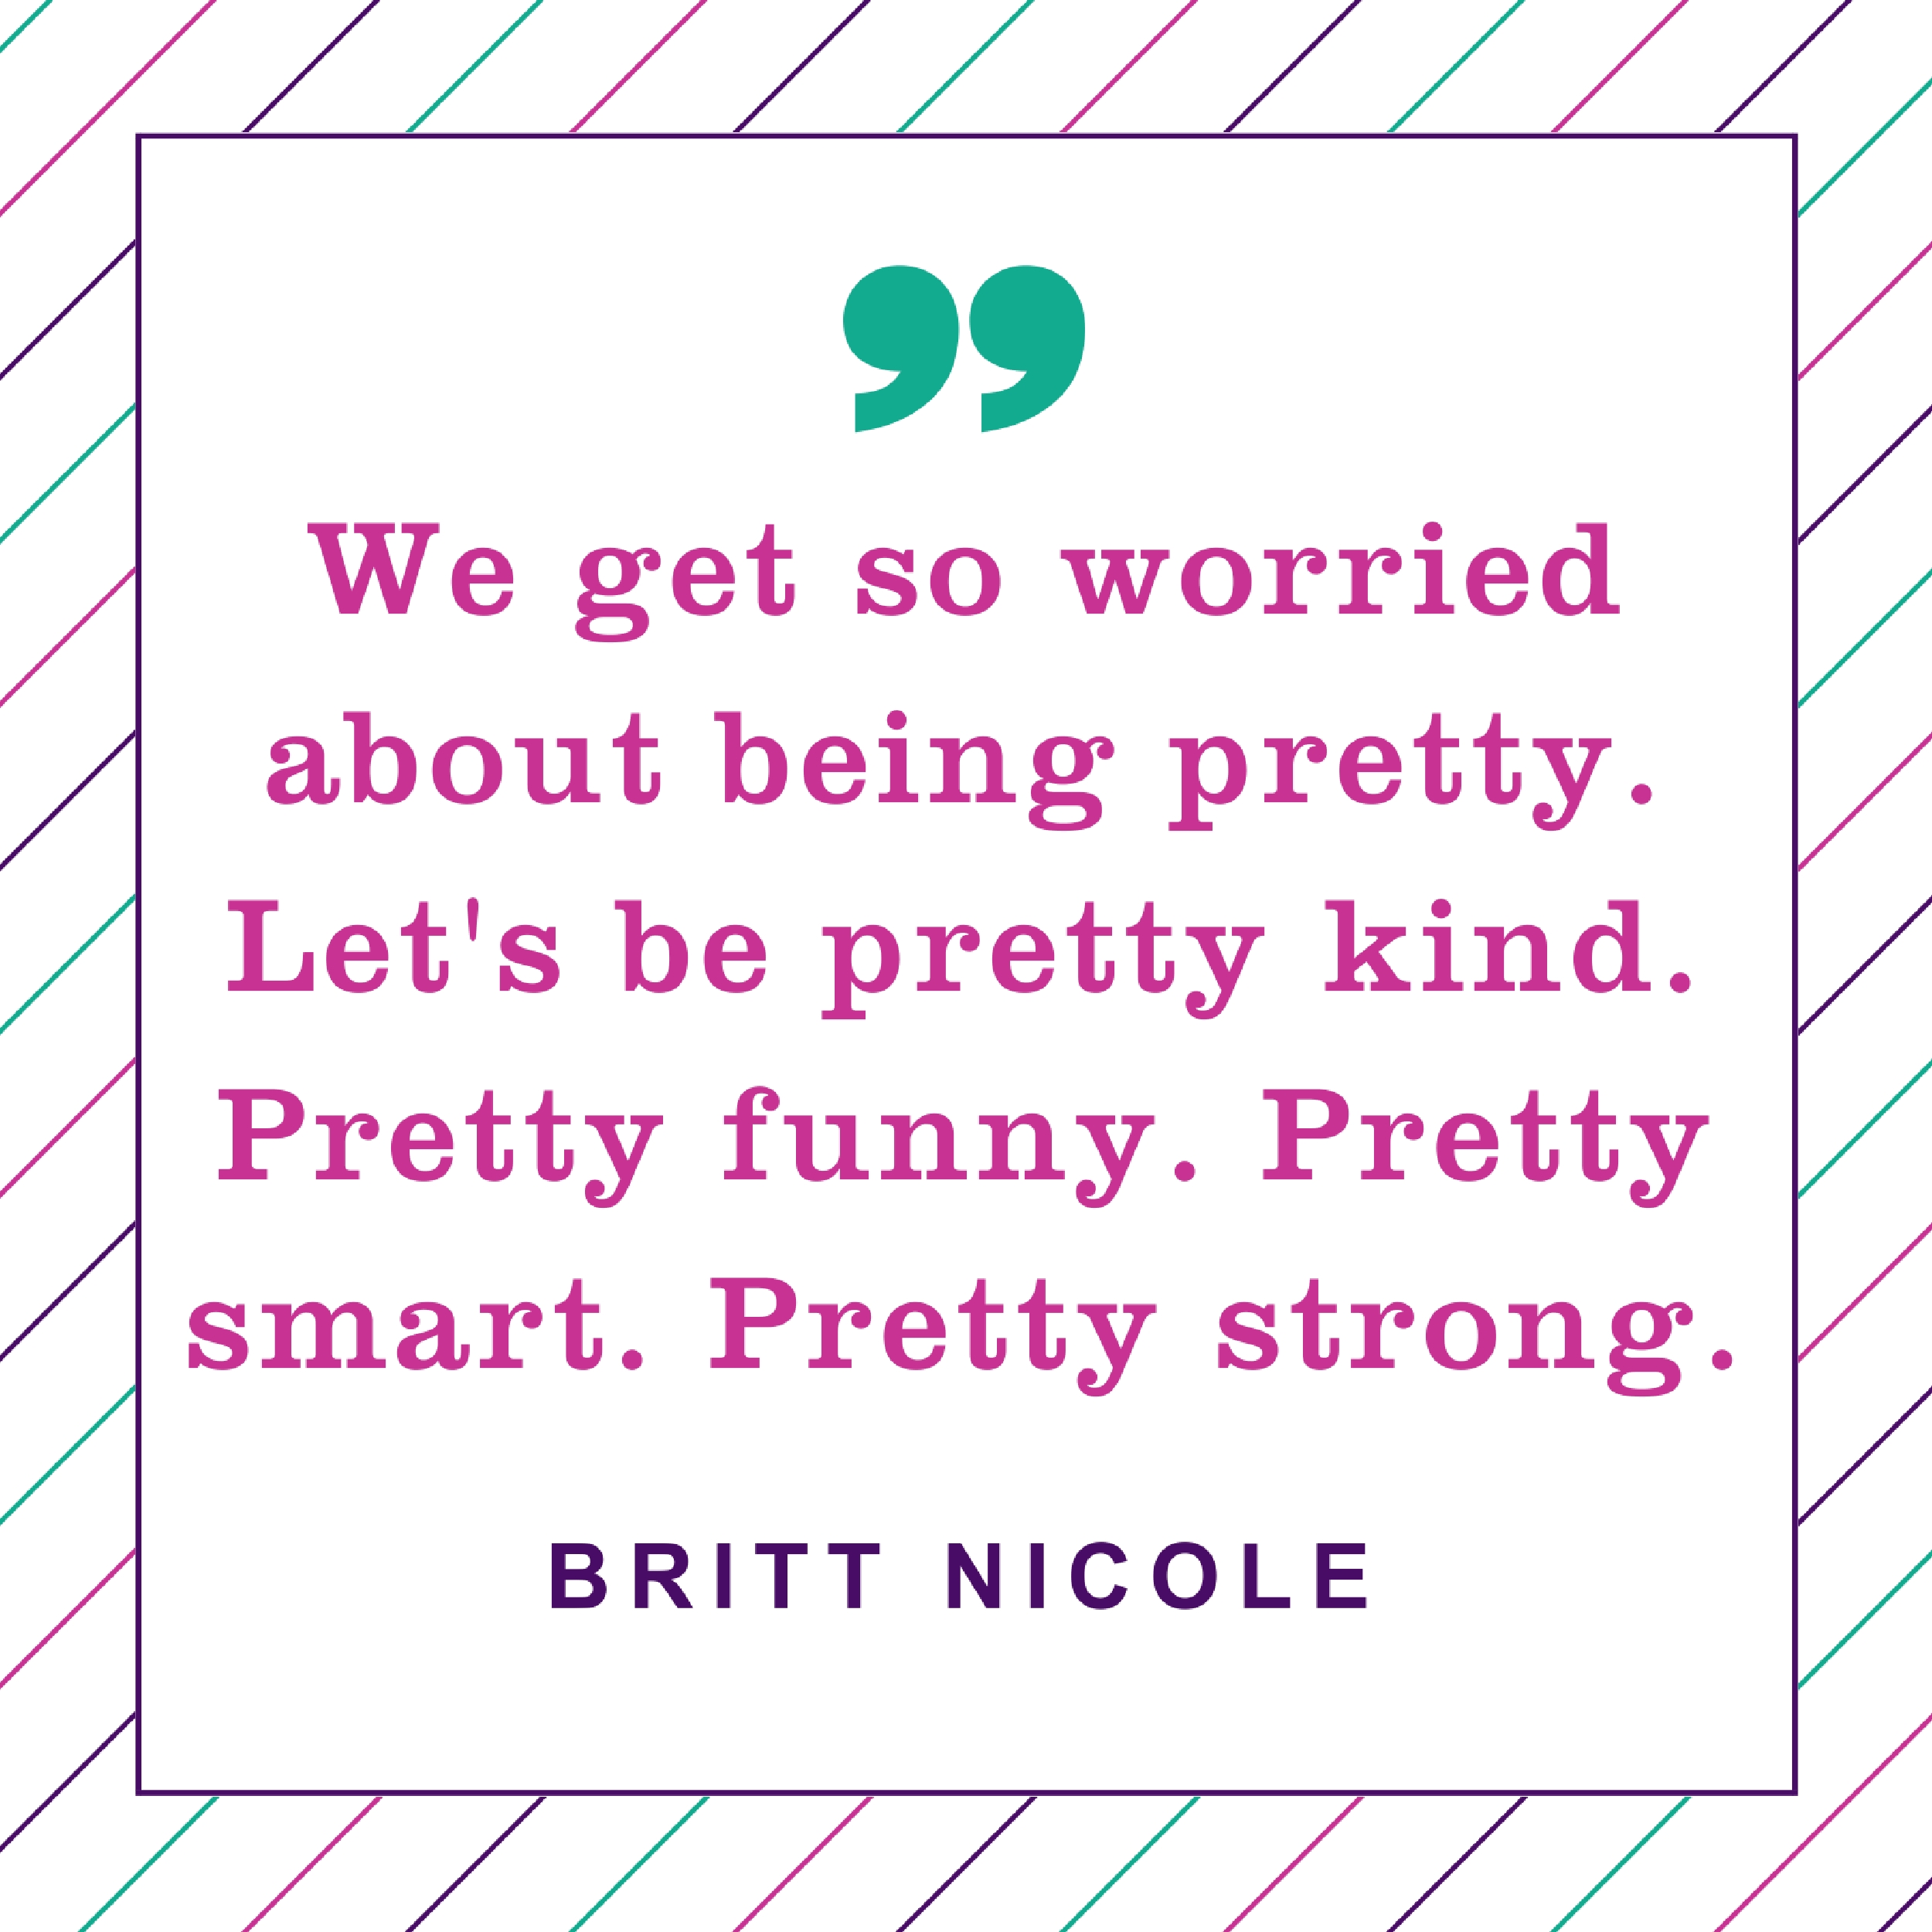 We get so worried about being pretty. Let's be pretty kind. Pretty funny. Pretty smart. Pretty strong. Britt Nicole